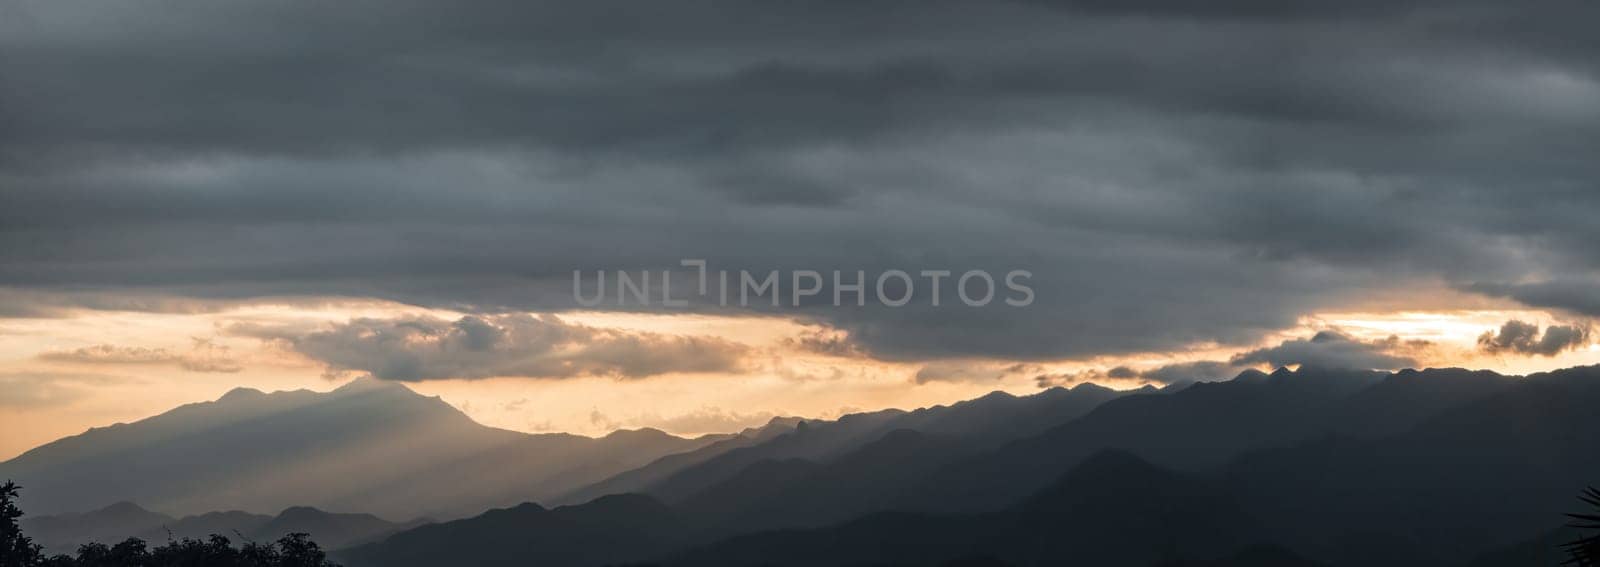 Stunning panoramic view of the mountains with layers and peaks illuminated by the setting sun, surrounded by a beautiful sky filled with clouds and sun rays.